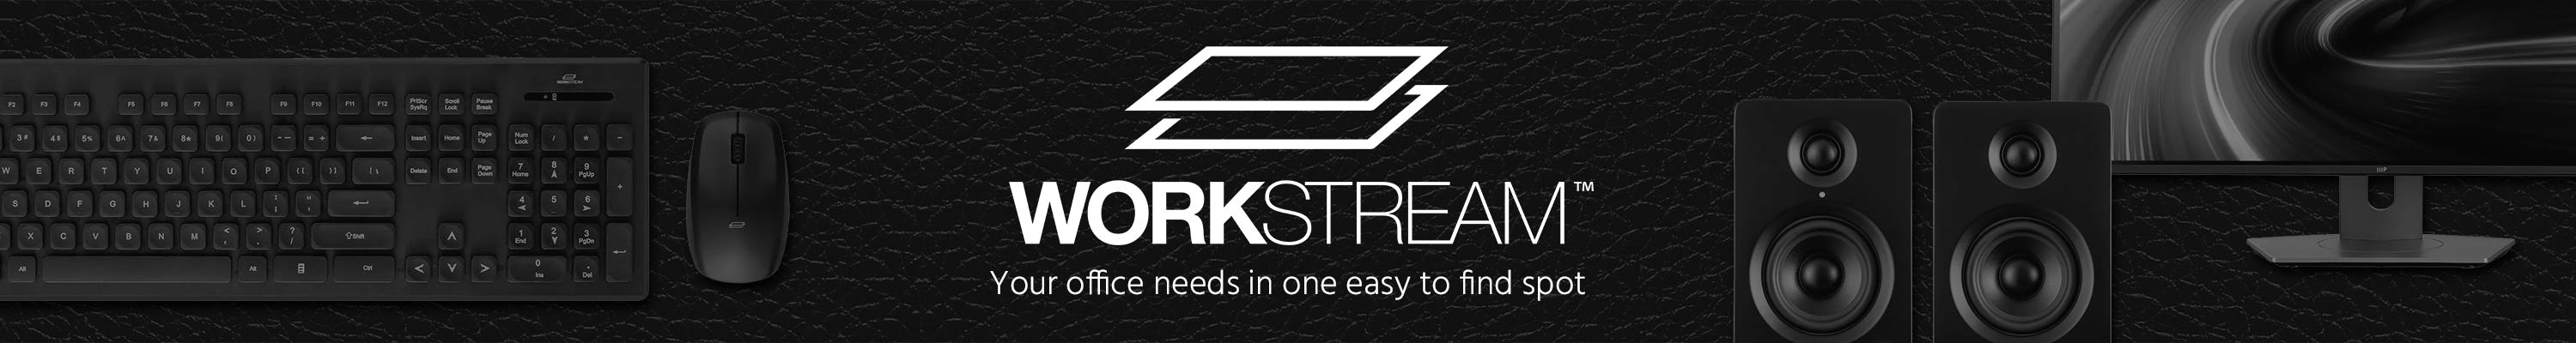 Workstream - Your office needs in one easy to find spot